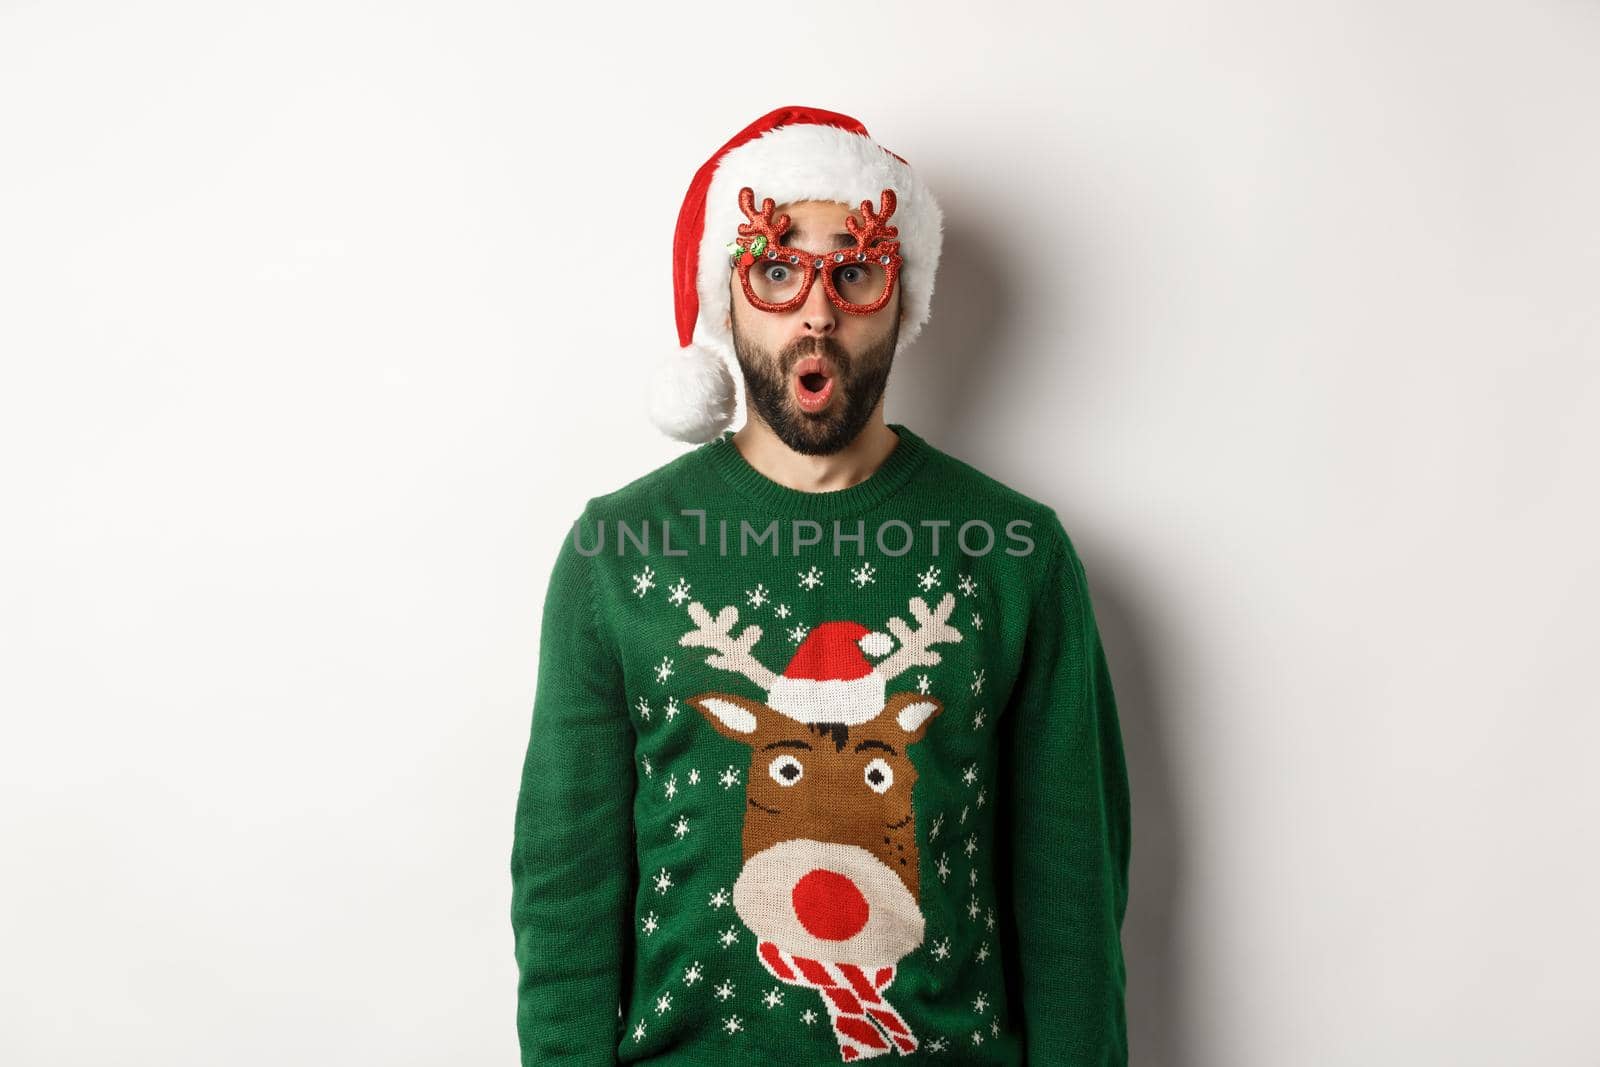 Christmas holidays, celebration concept. Surprised man in Santa hat and party glasses looking at something awesome, standing over white background.